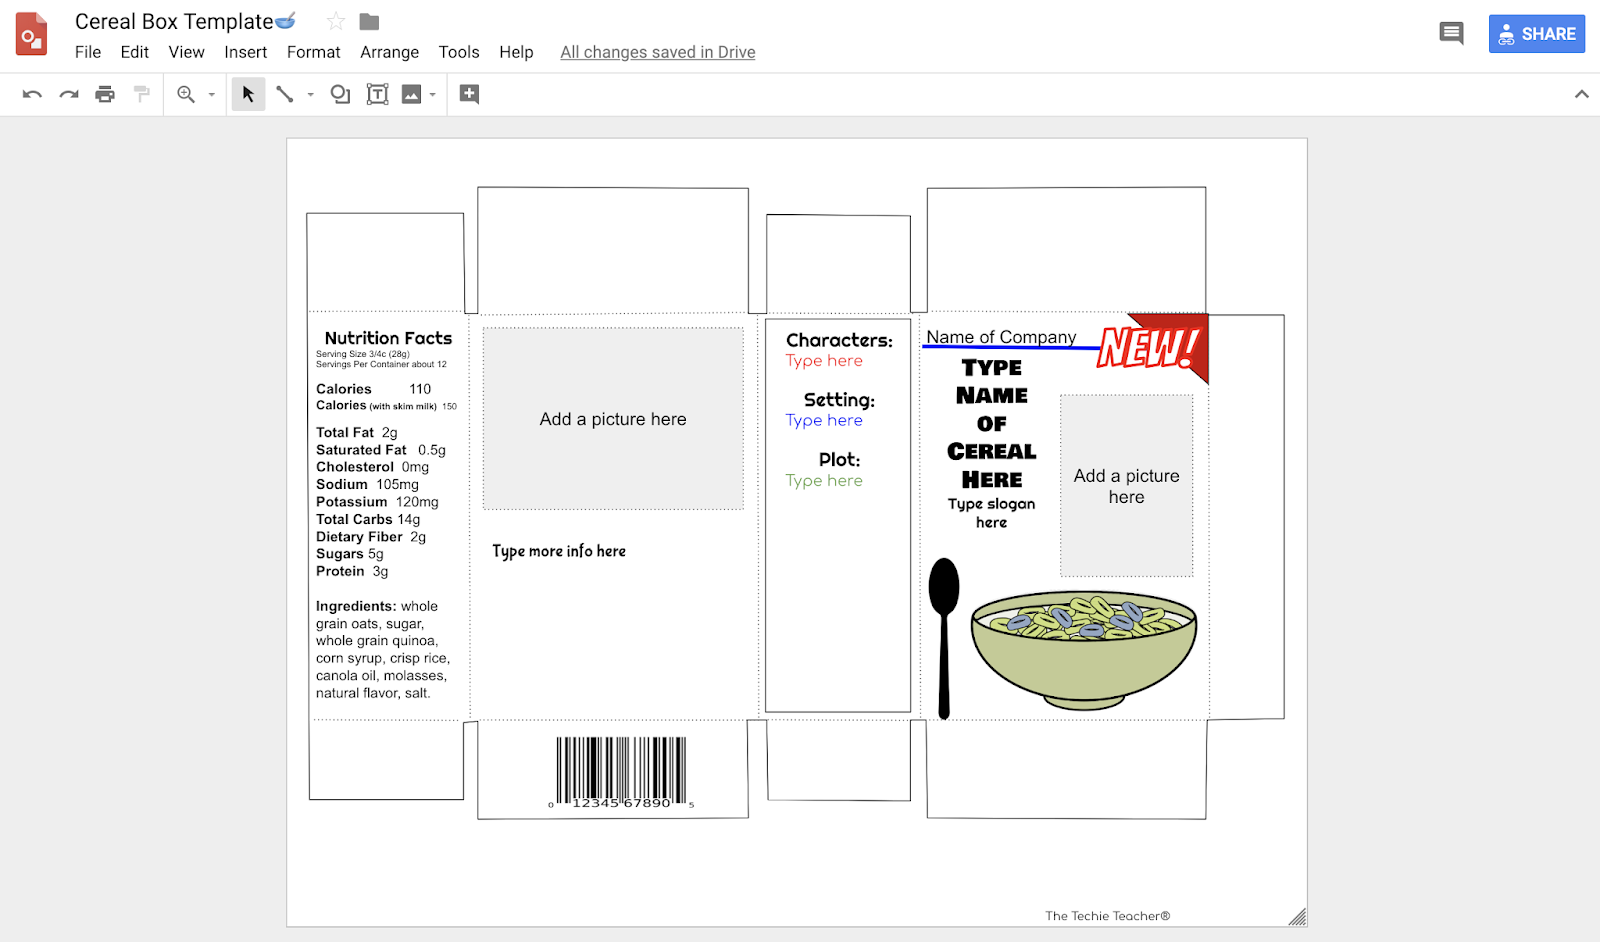 Design Your Own Cereal Box Template For Your Needs